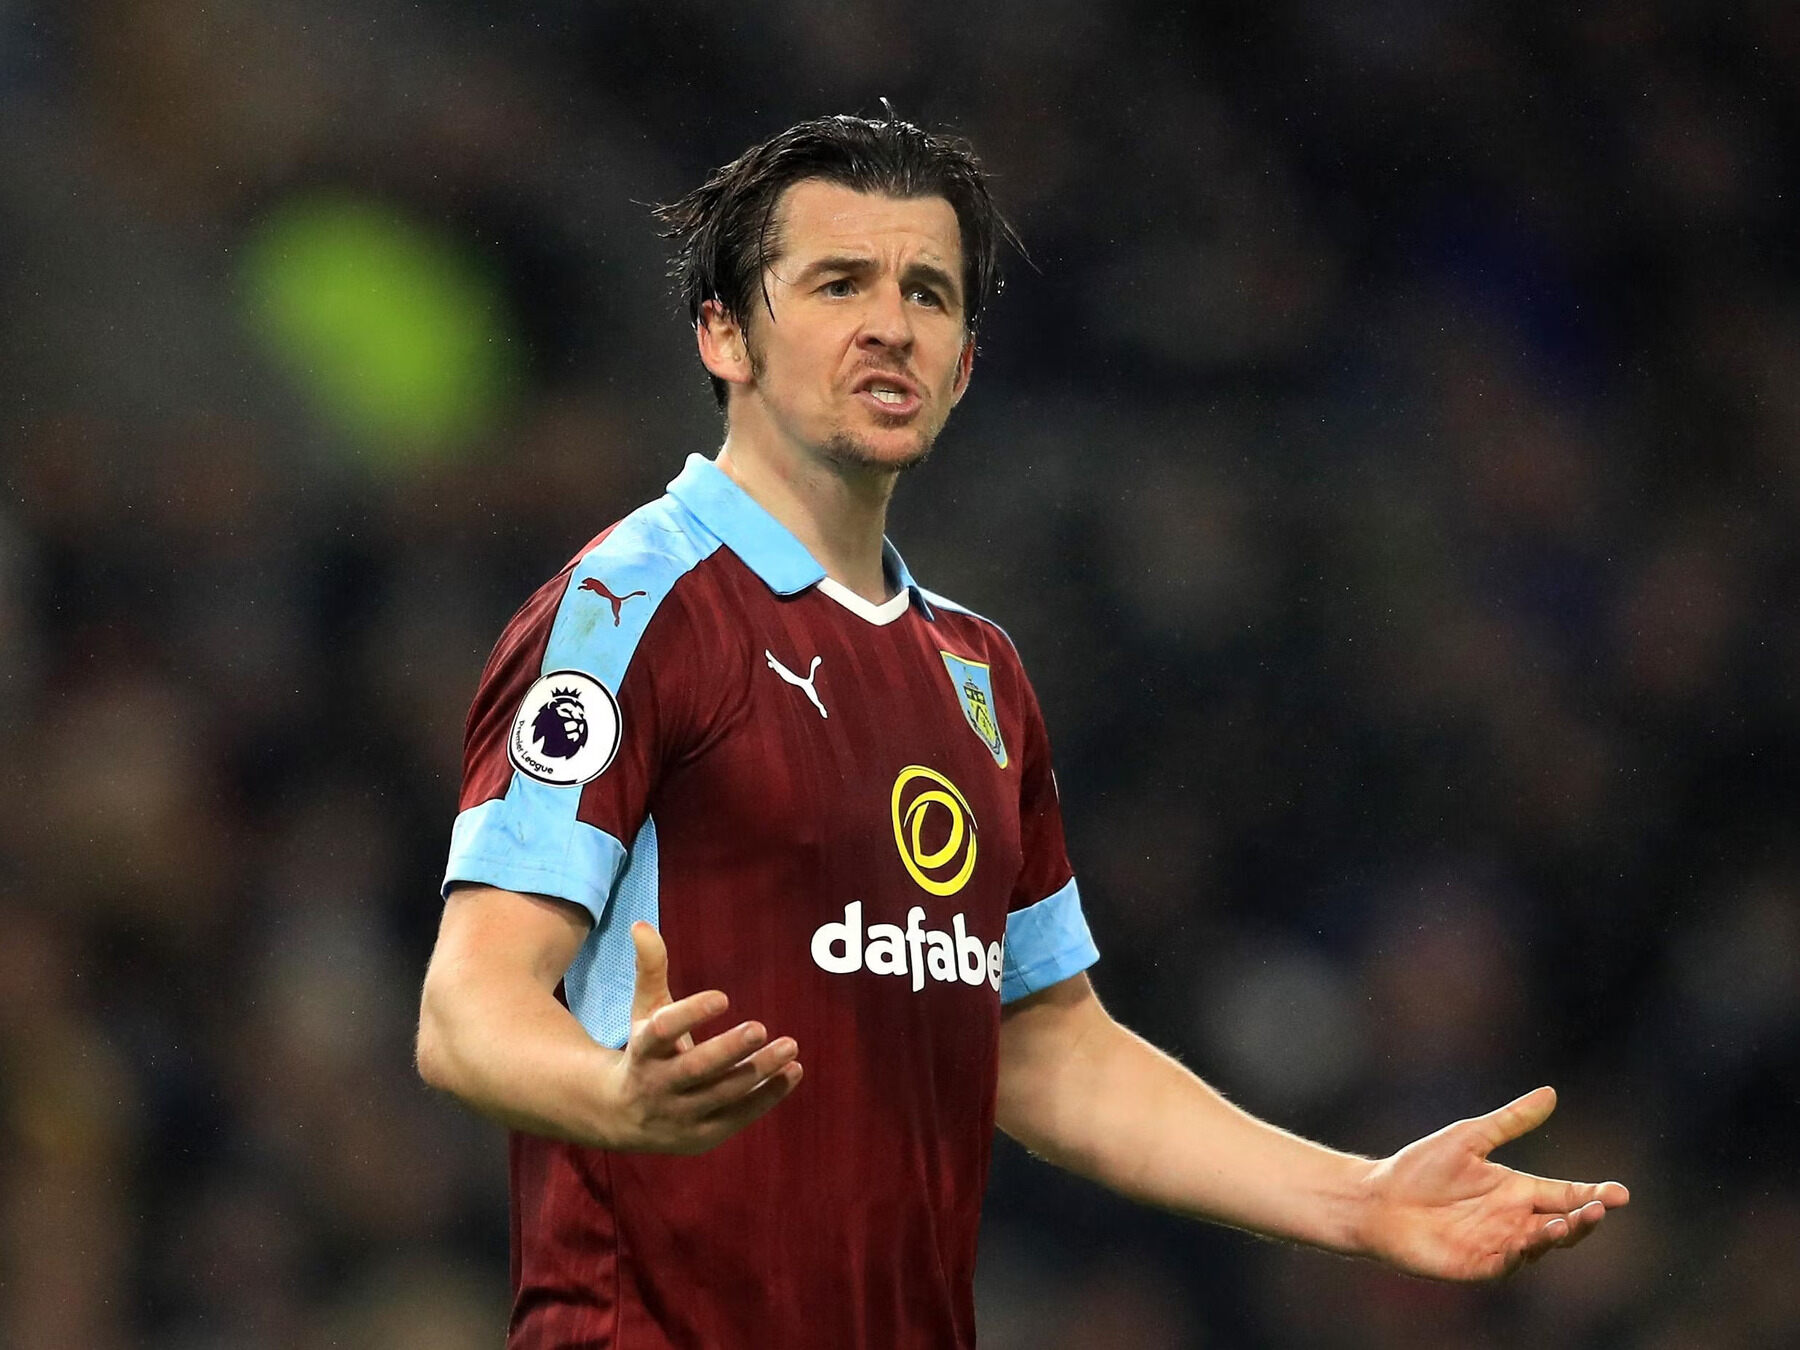 30-facts-about-joey-barton